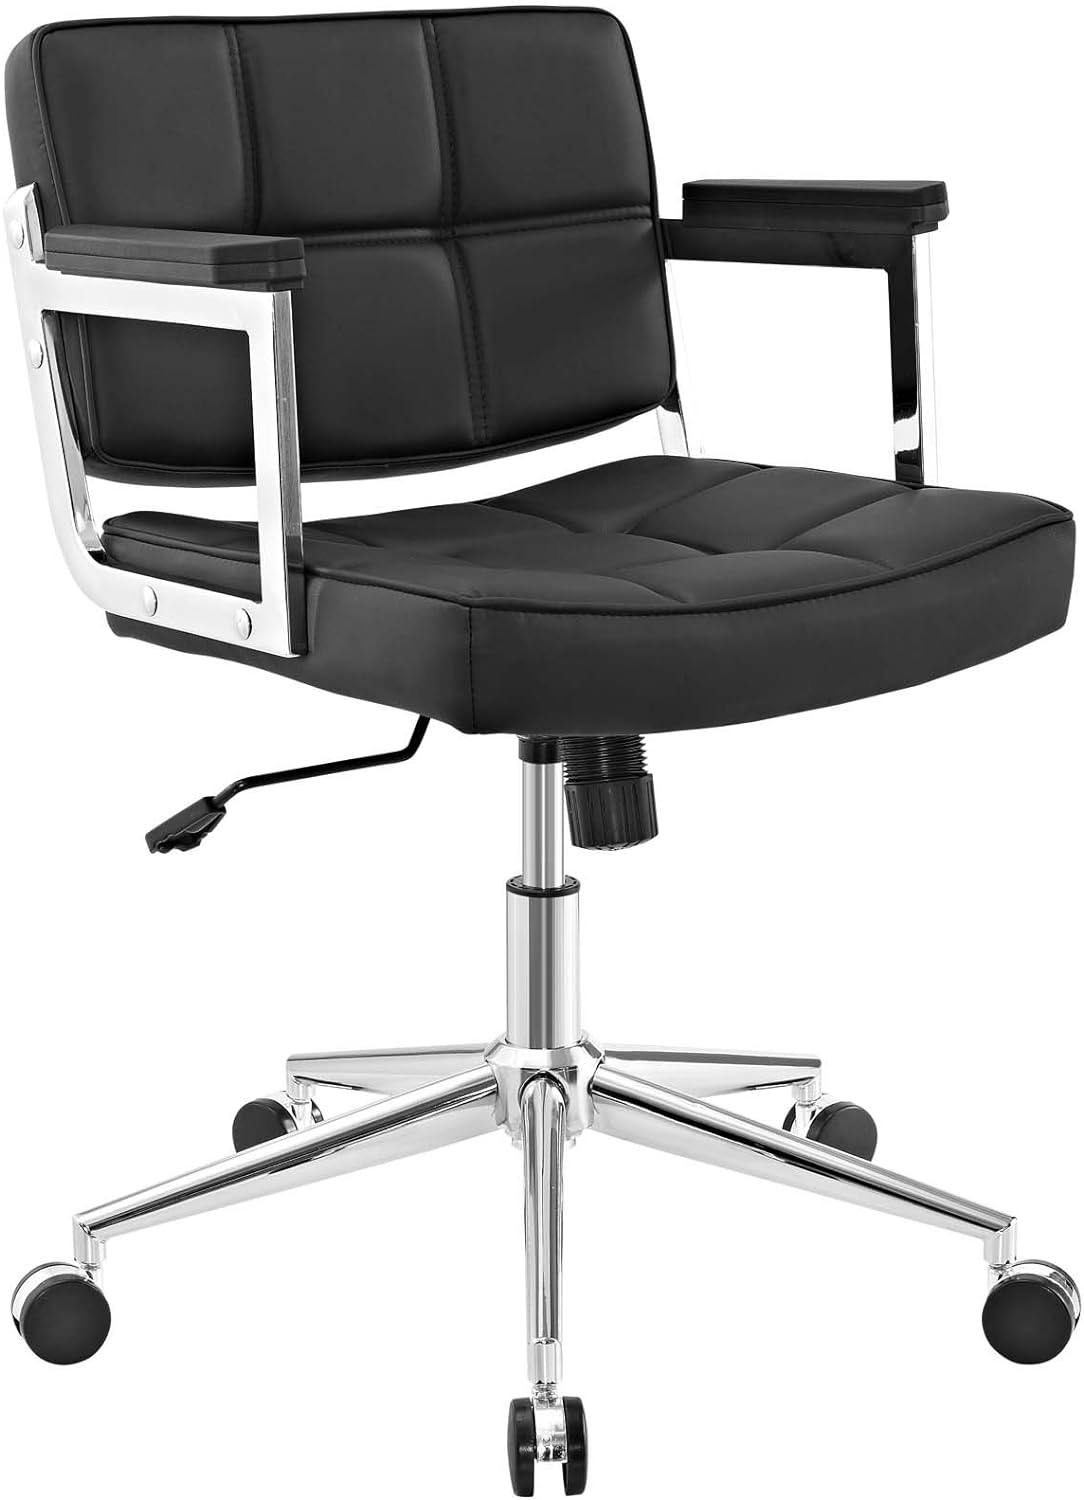 Portray Modern Swivel Office Chair in Black Leather and Chrome Metal